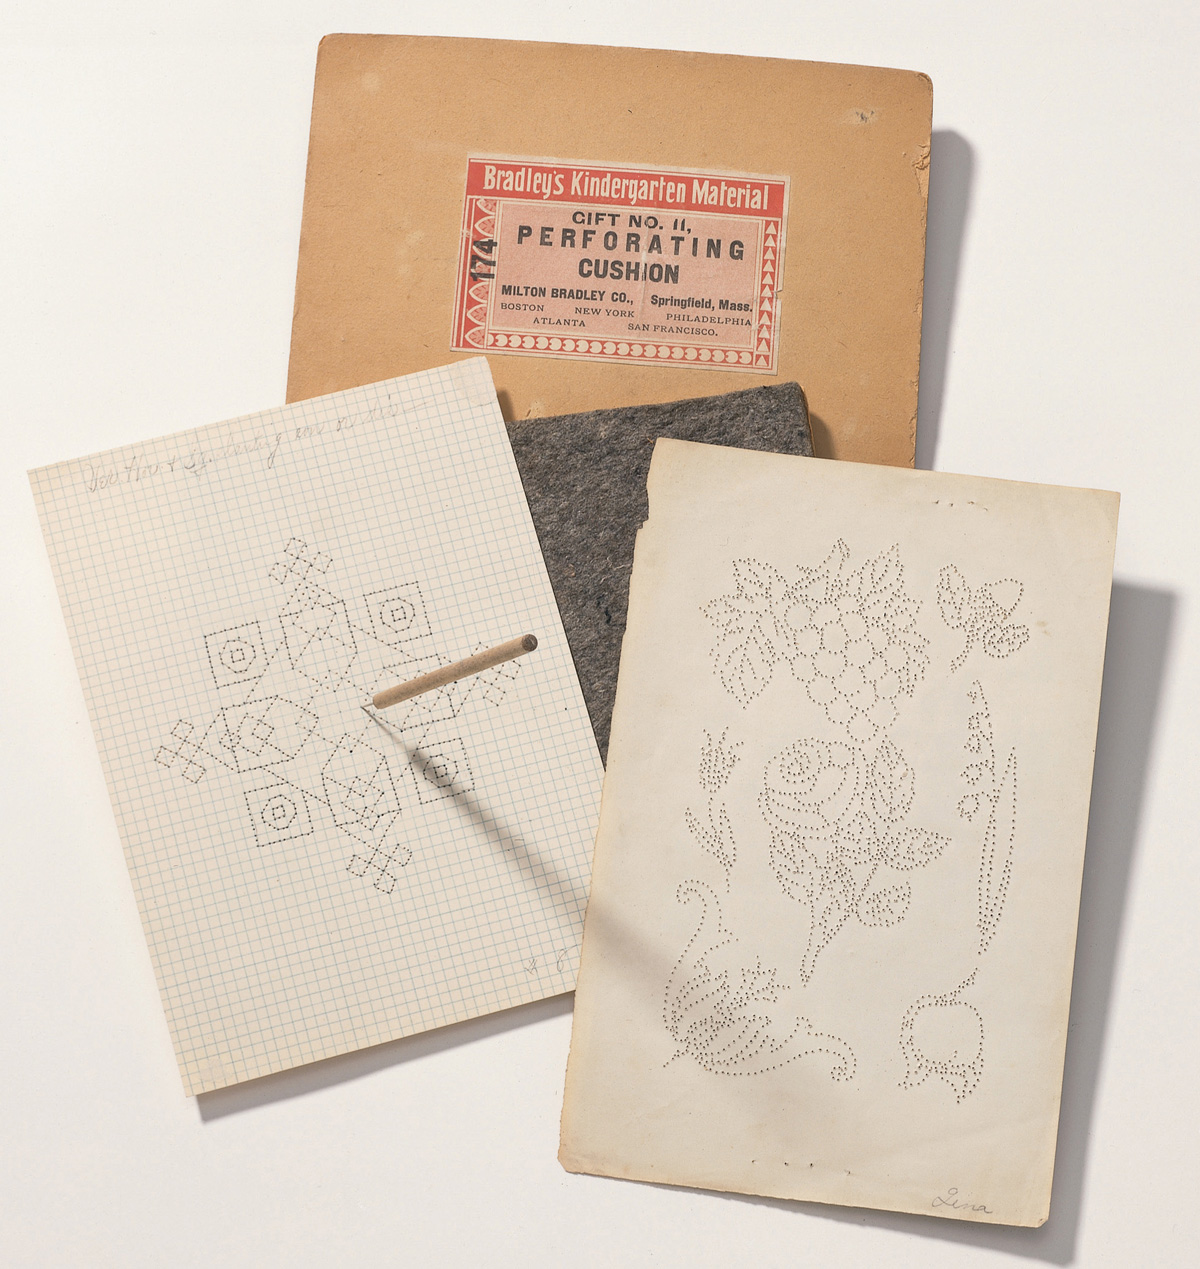 A photograph of perforating cushions manufactured by Milton Bradley Company, and two paper pricking exercises by a teacher and a kindergartner made using them, United States, circa 1900.